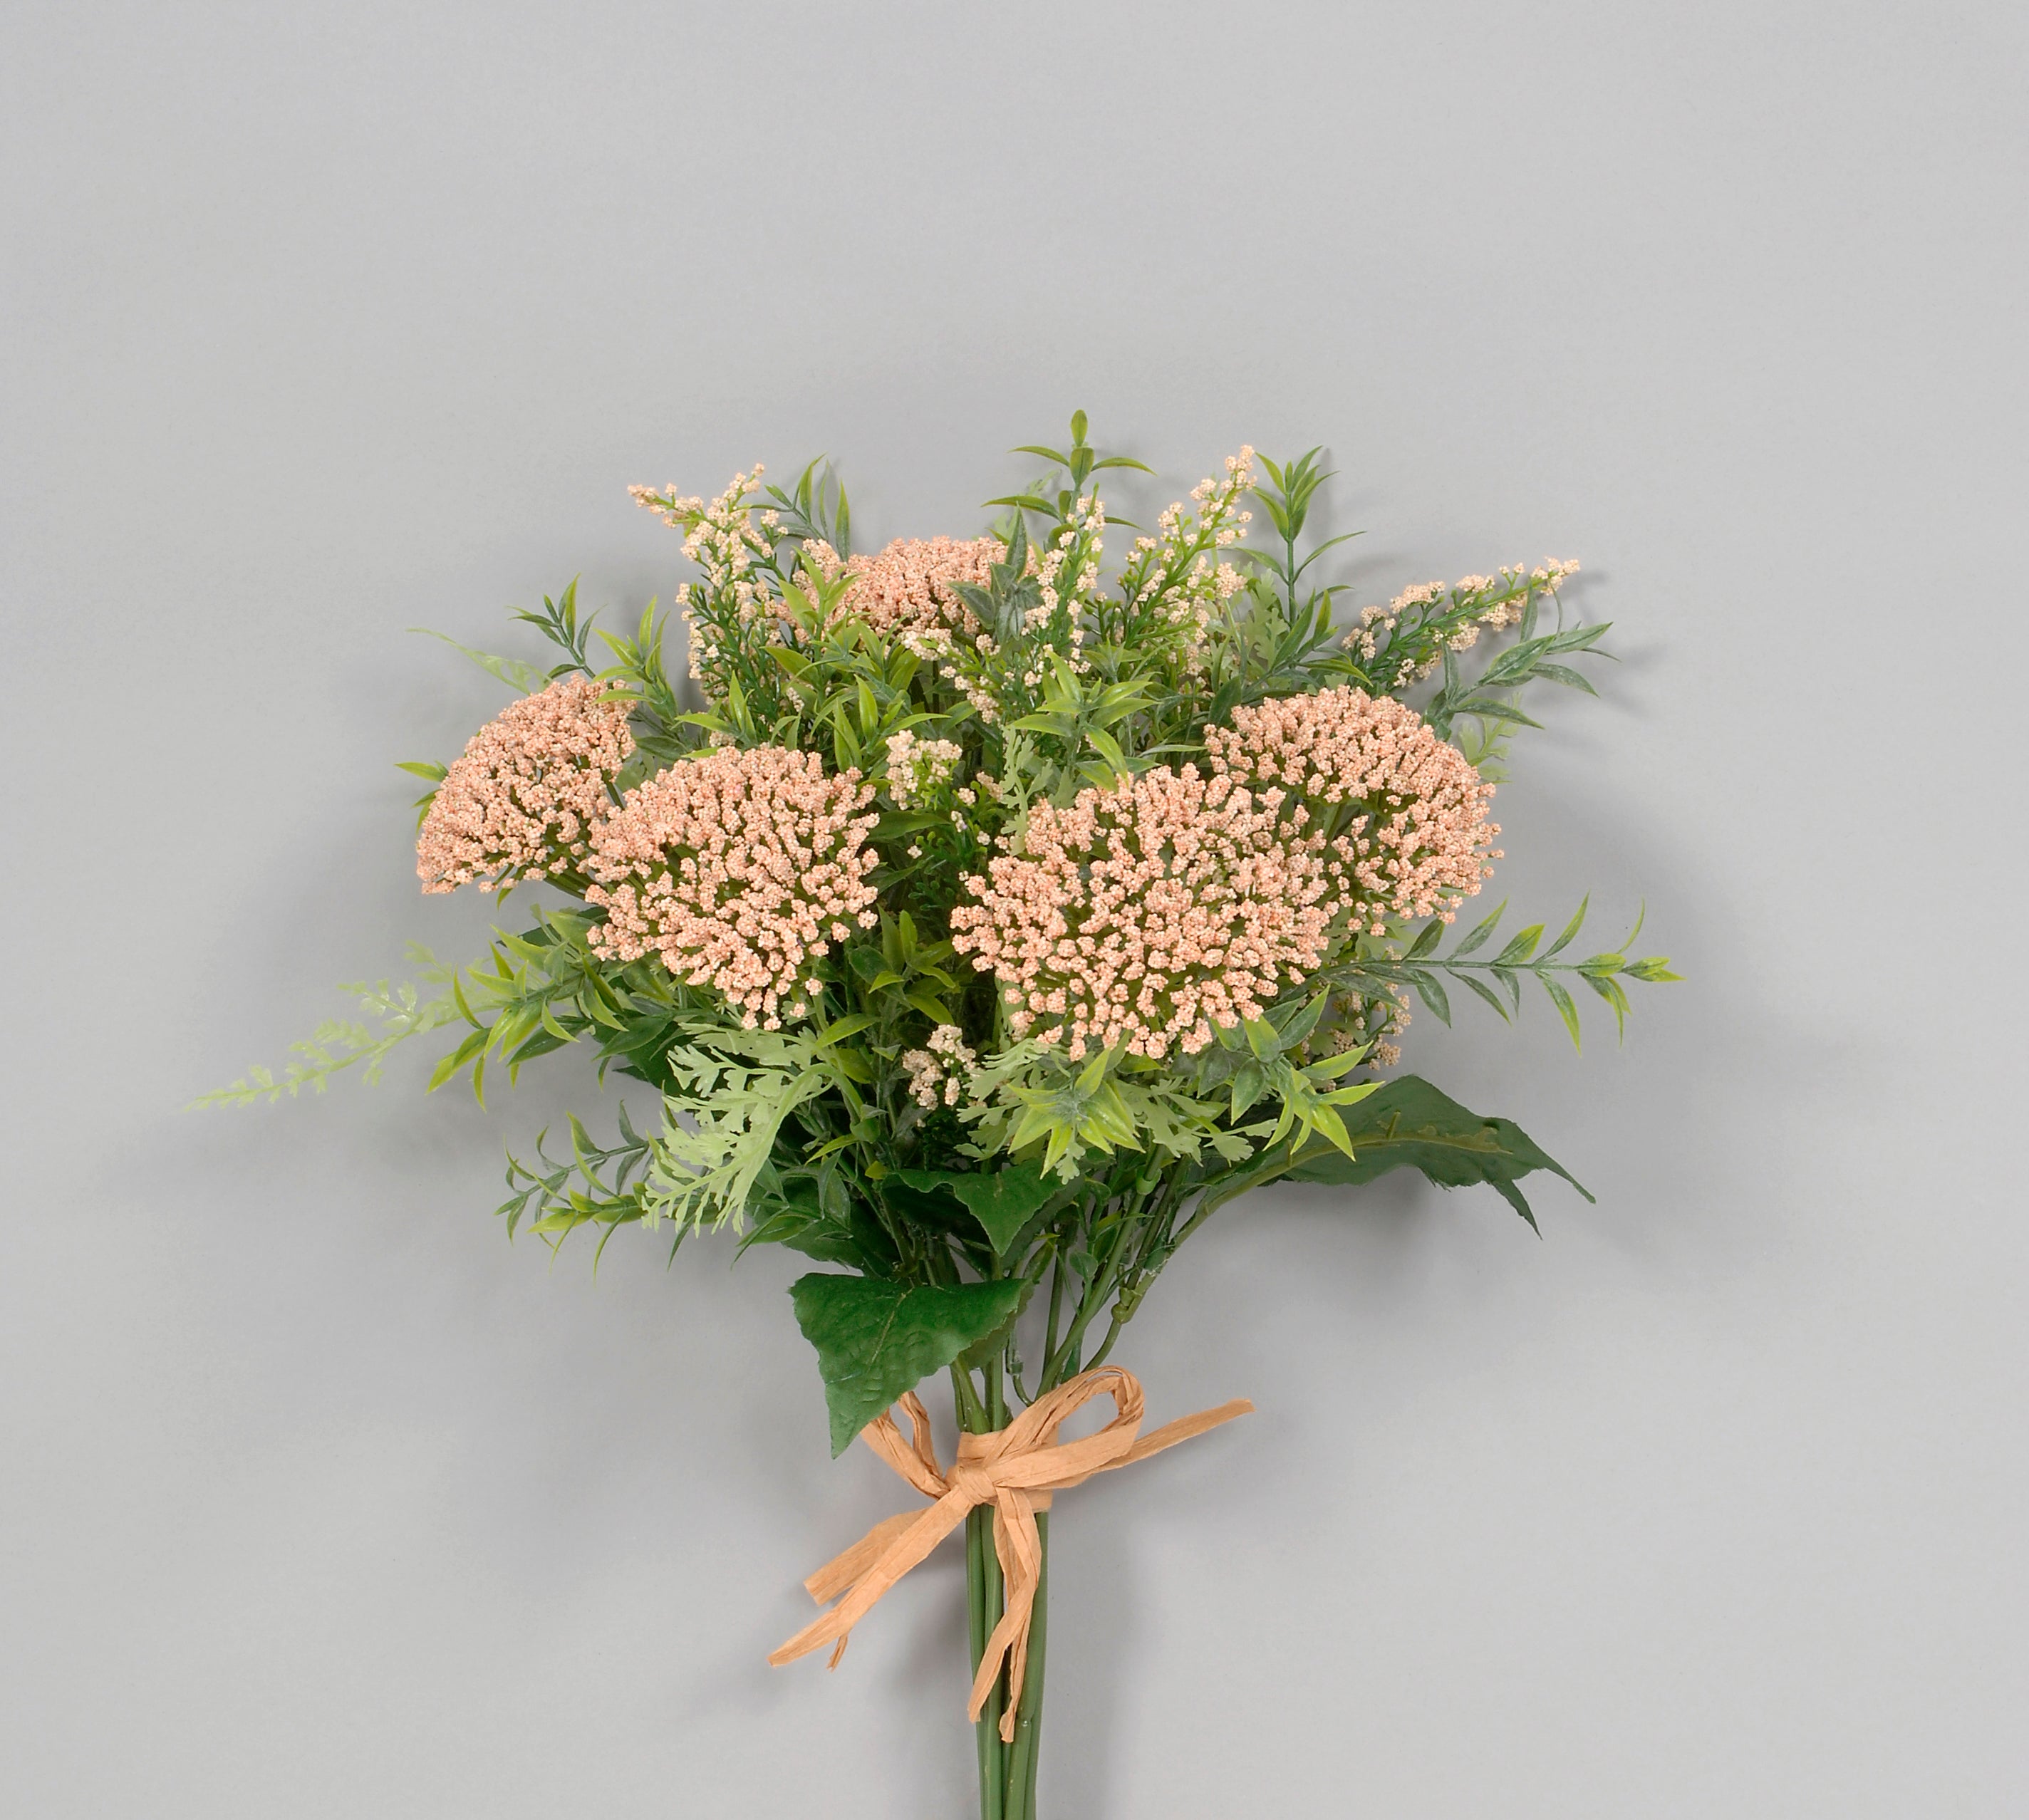 AF2535 PEACH 13" QUEEN ANNE'S LACE